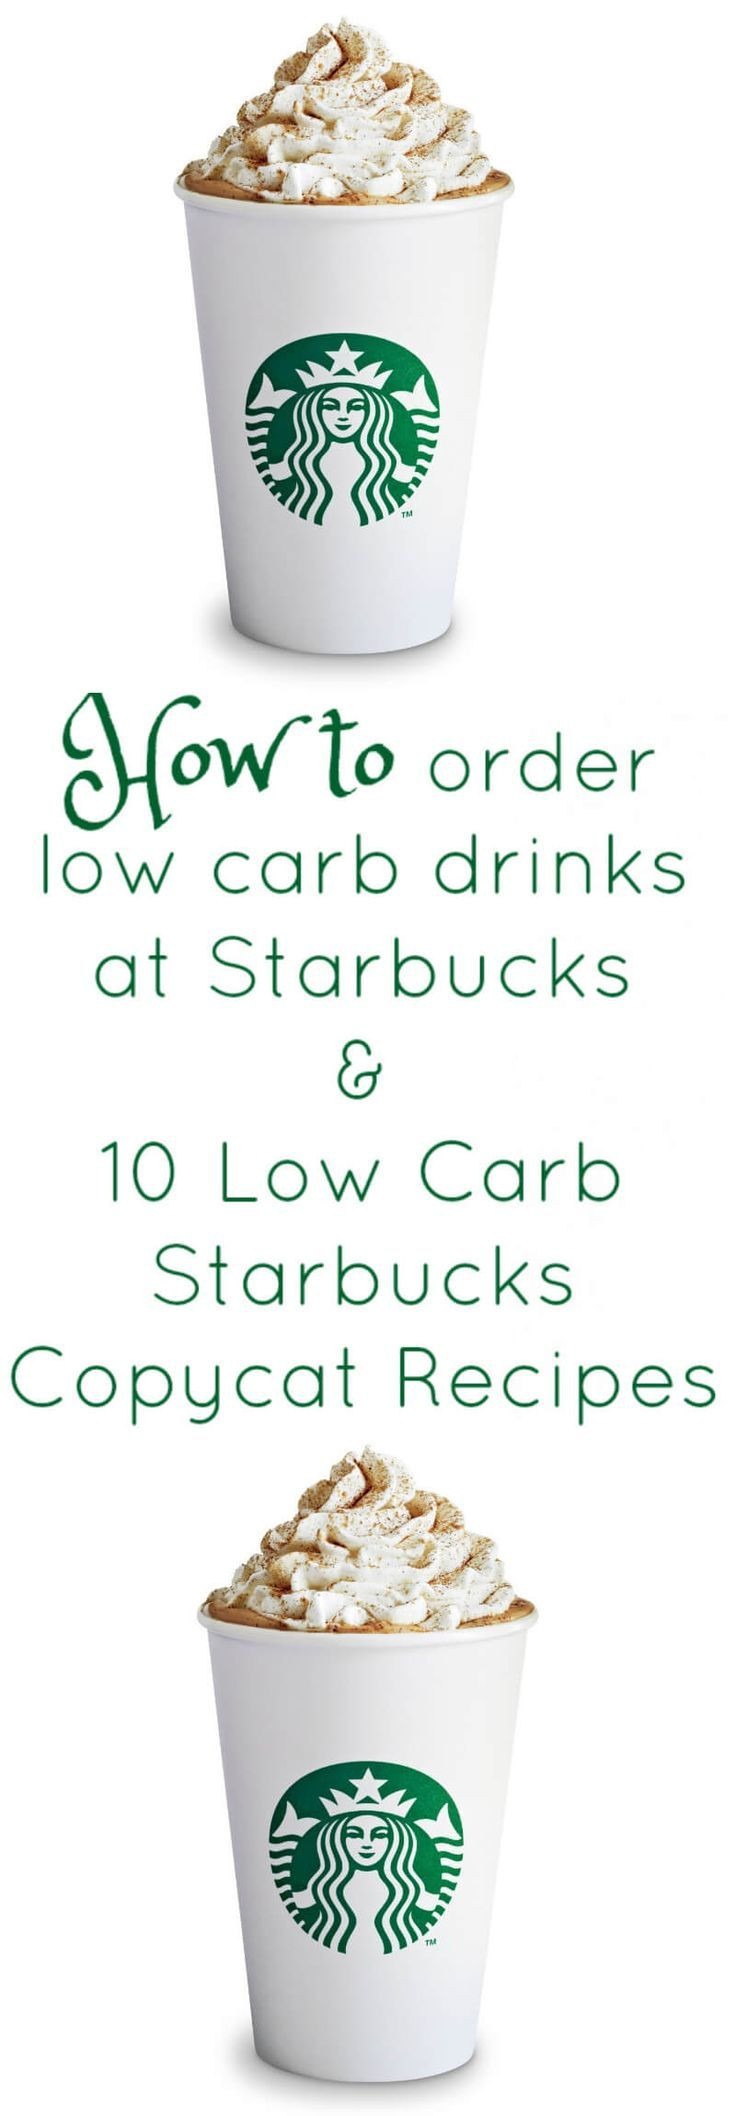 Low Carb Keto Starbucks Drinks
 How to Order Low Carb Keto at Starbucks